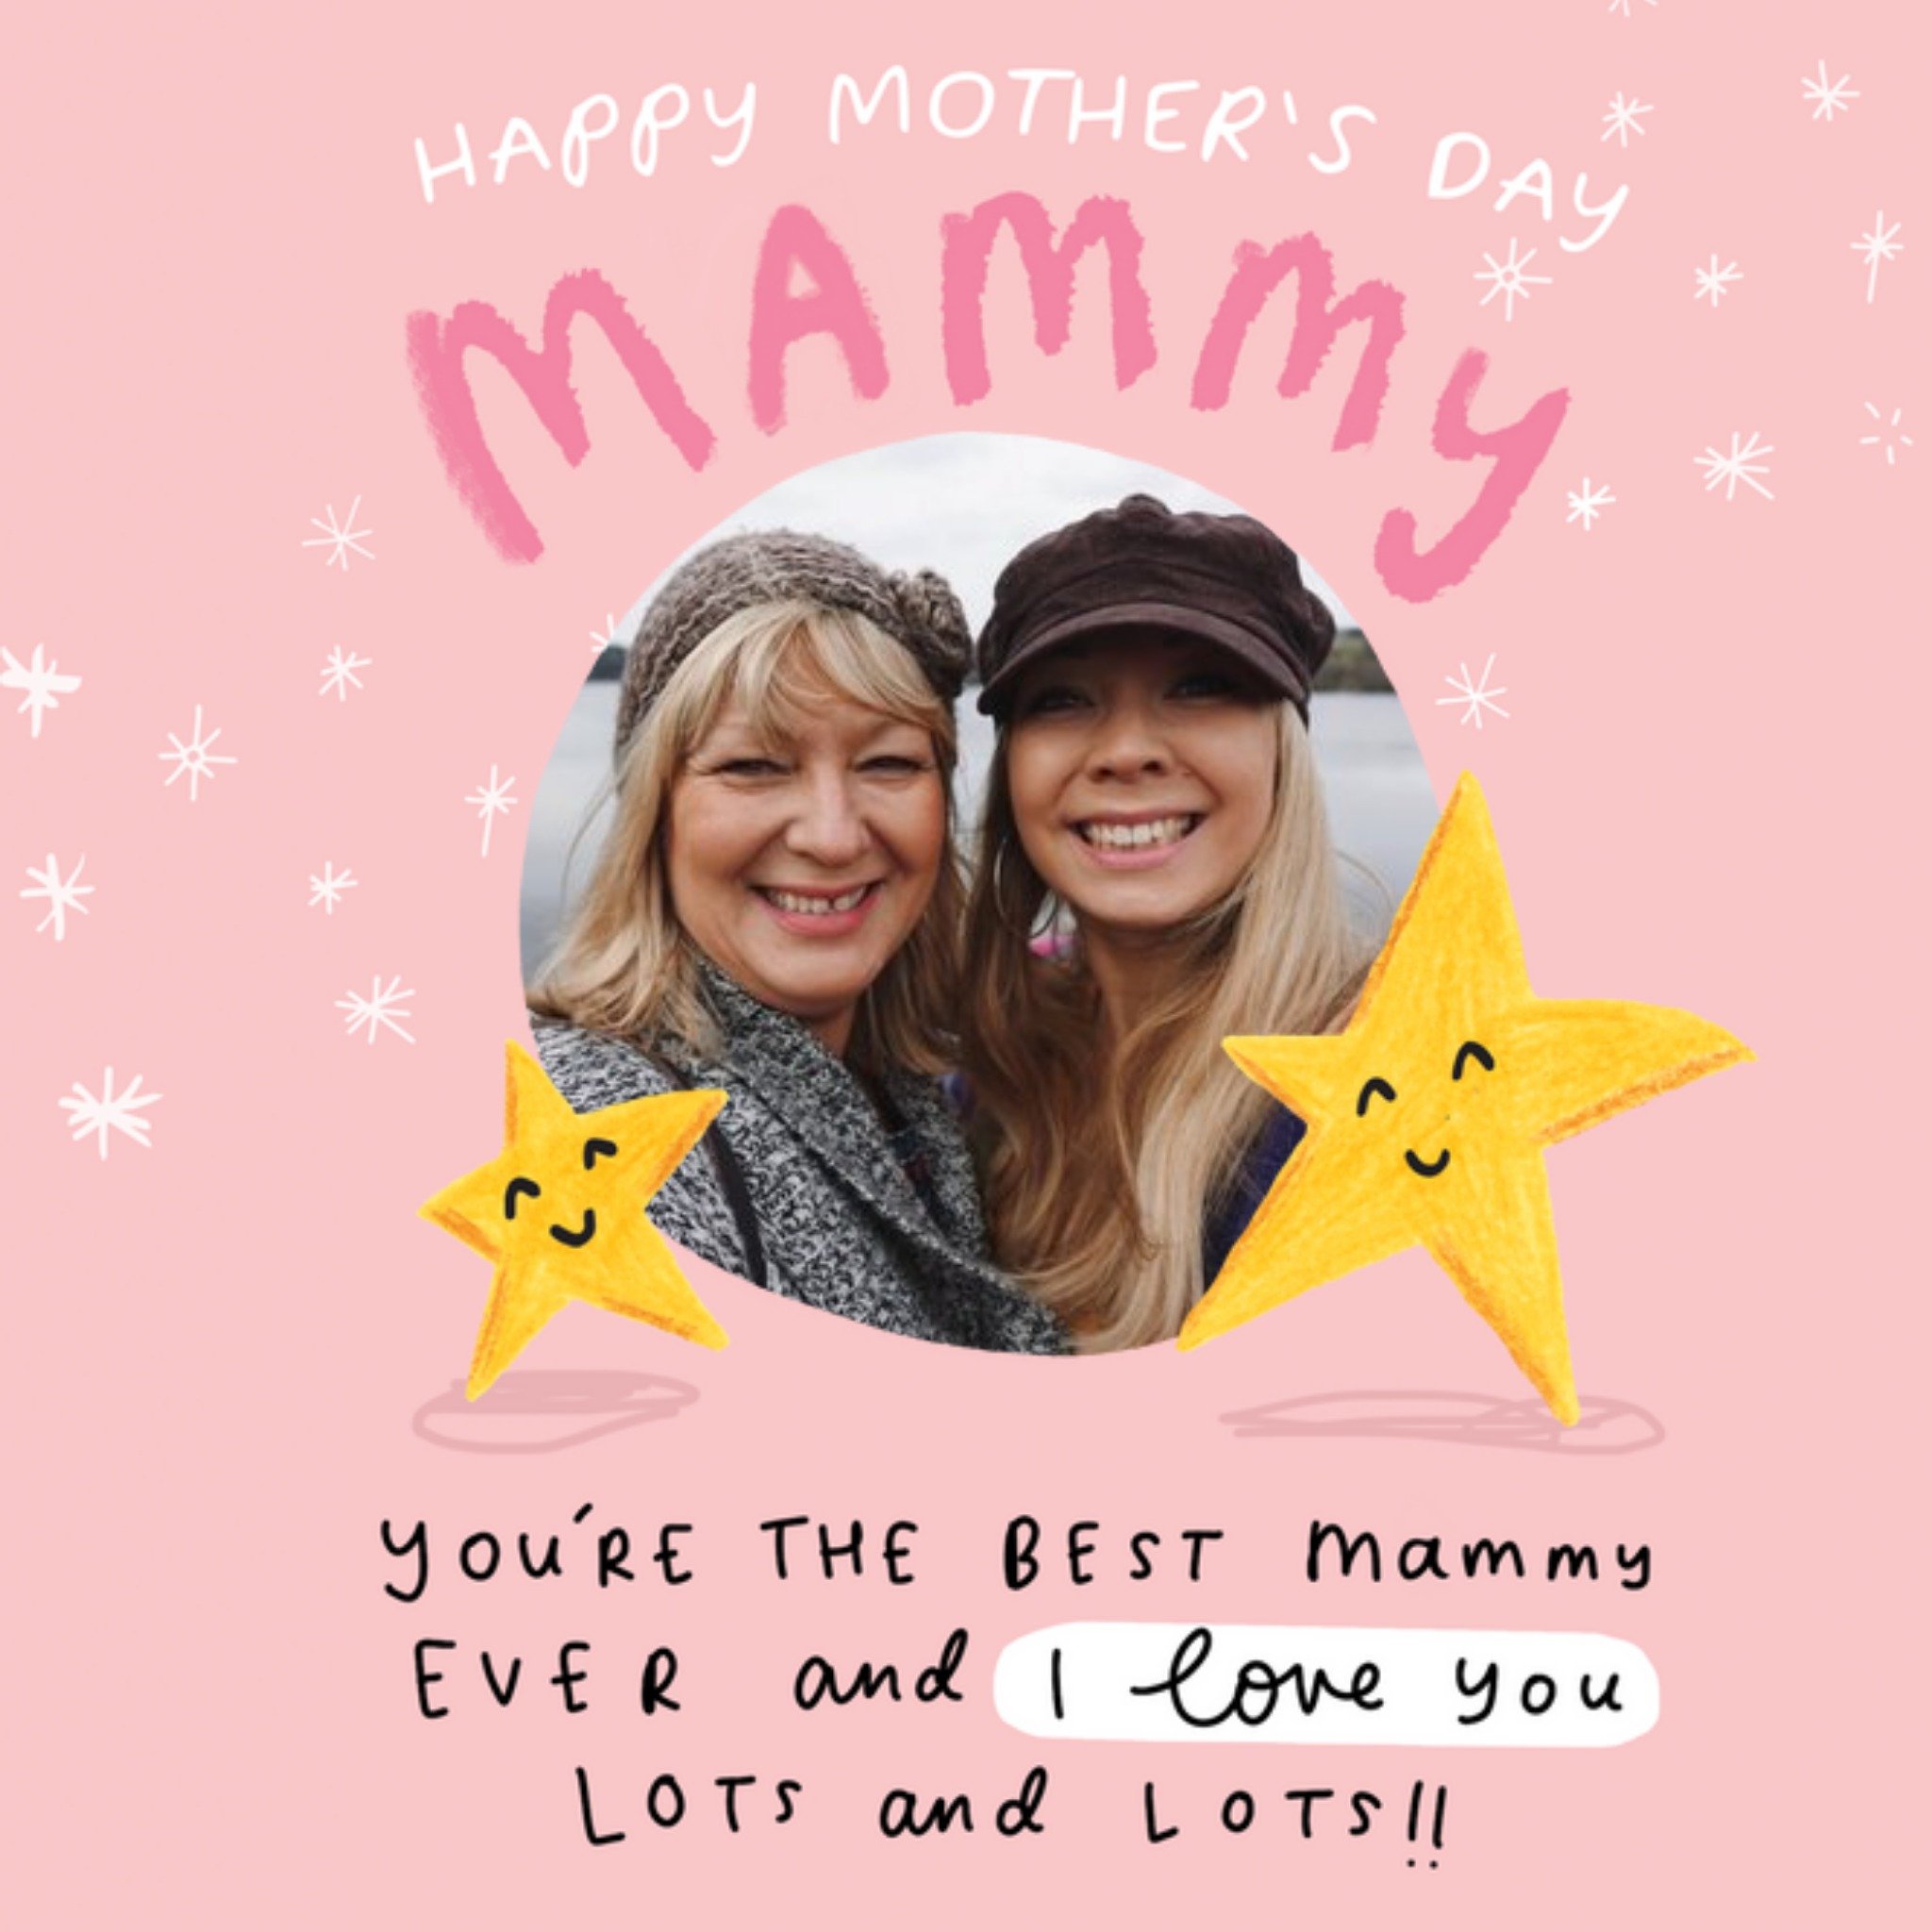 Moonpig Happy Mother's Day Mammy, Large Card